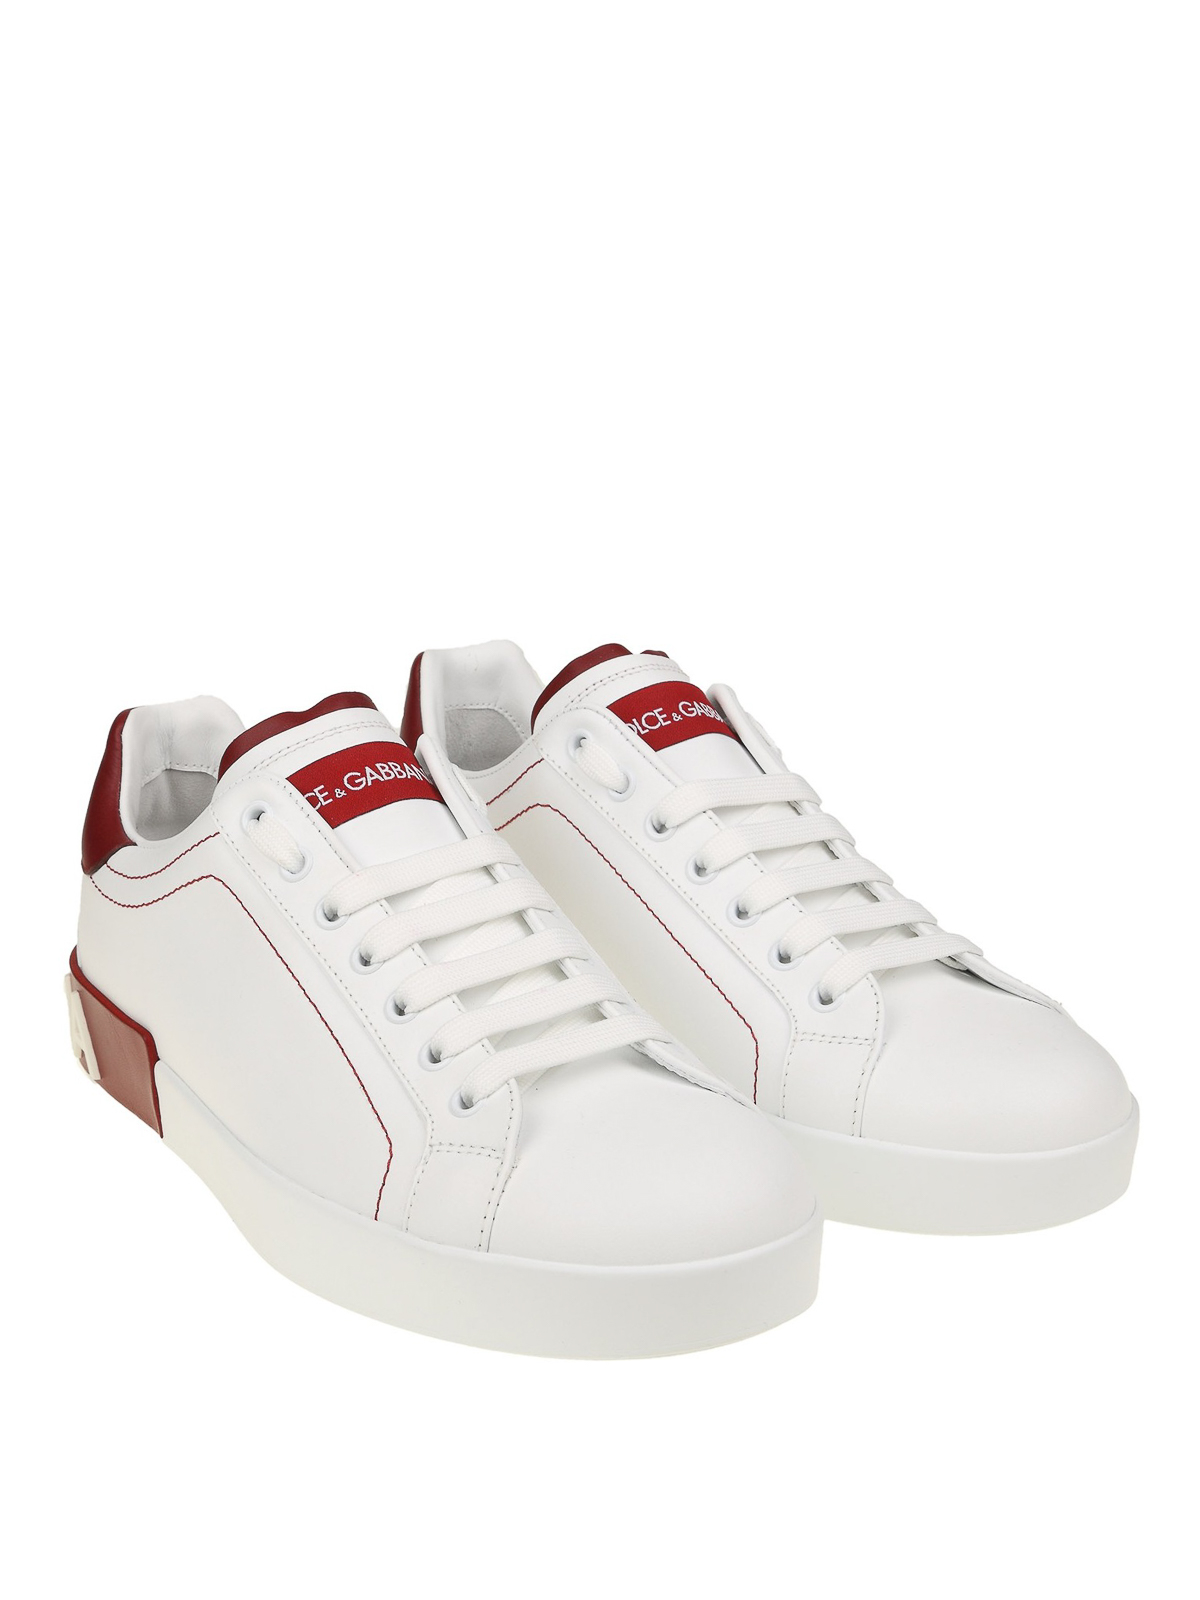 dolce and gabbana white and red sneakers